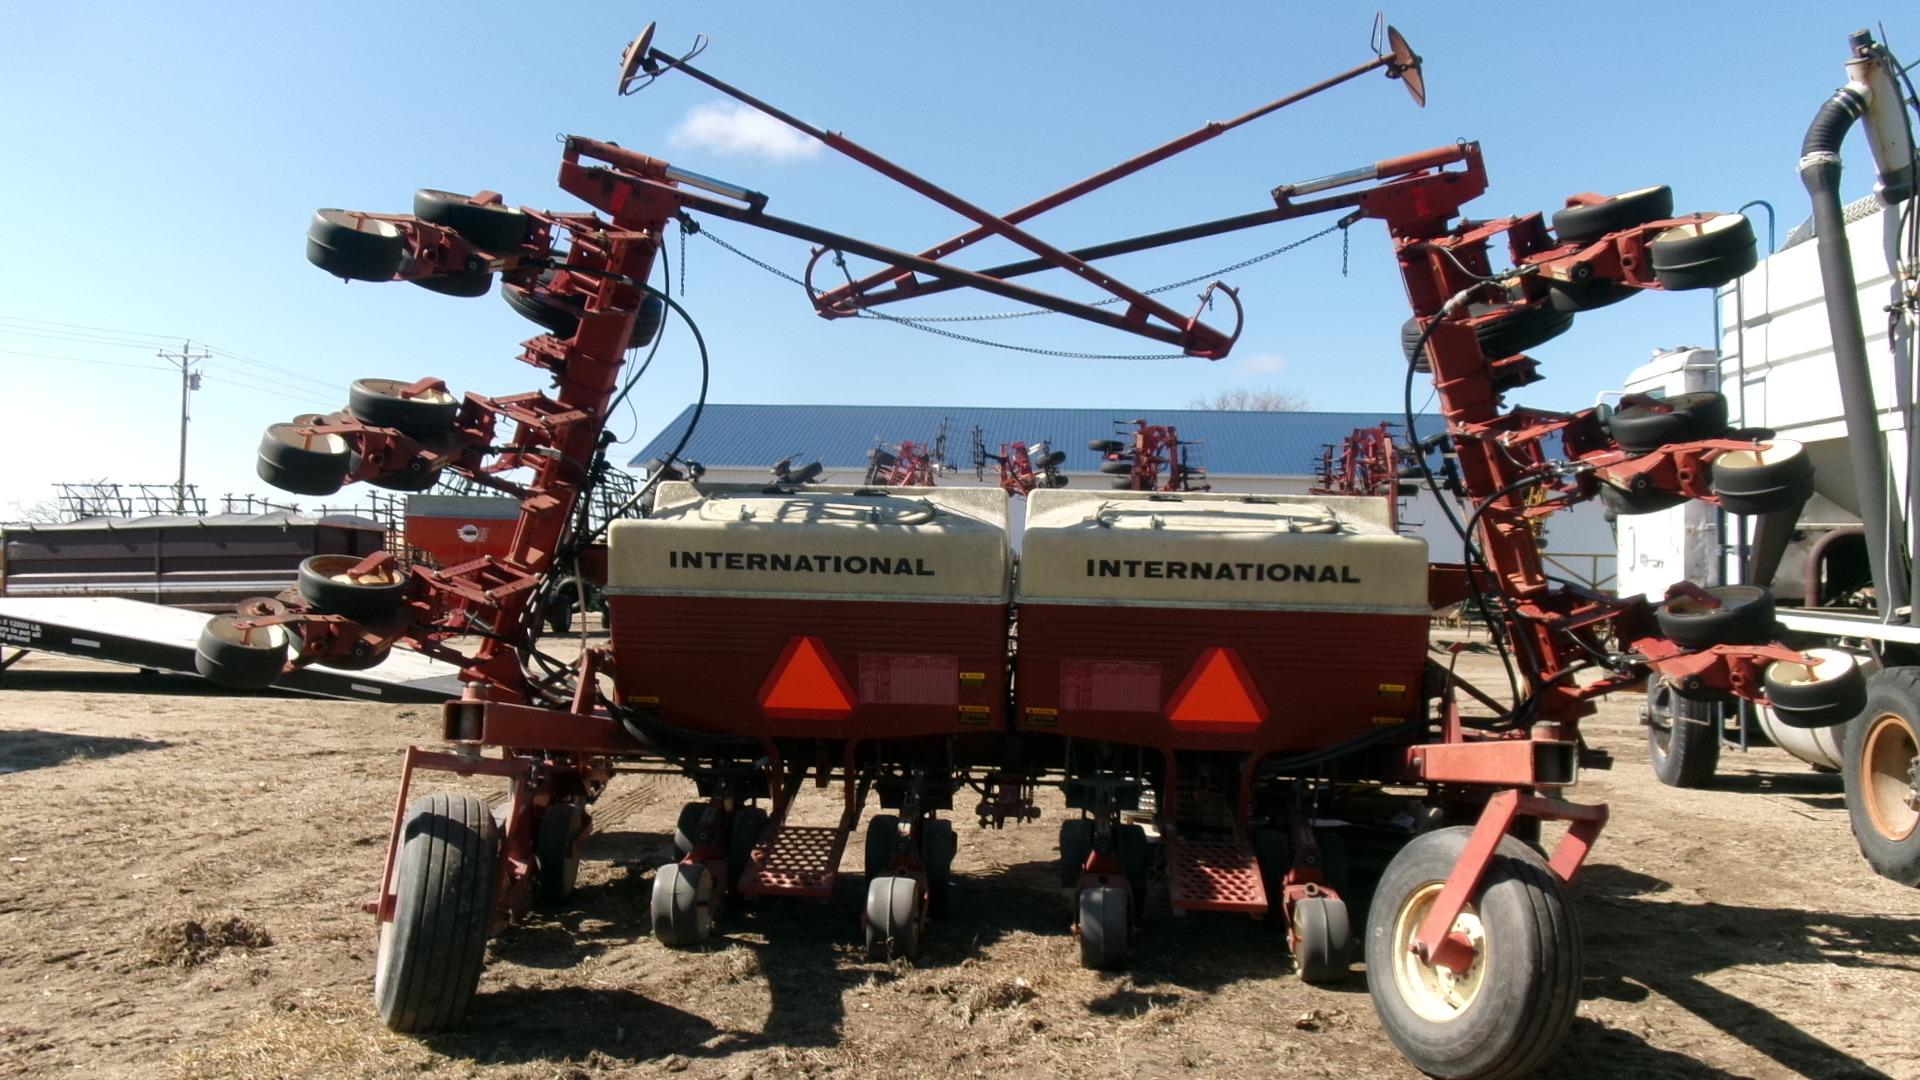 12-30" IHC 800 3 PT. CYCLO PLANTER, 1,000 PTO, markers, several drums,, monitor in office, +